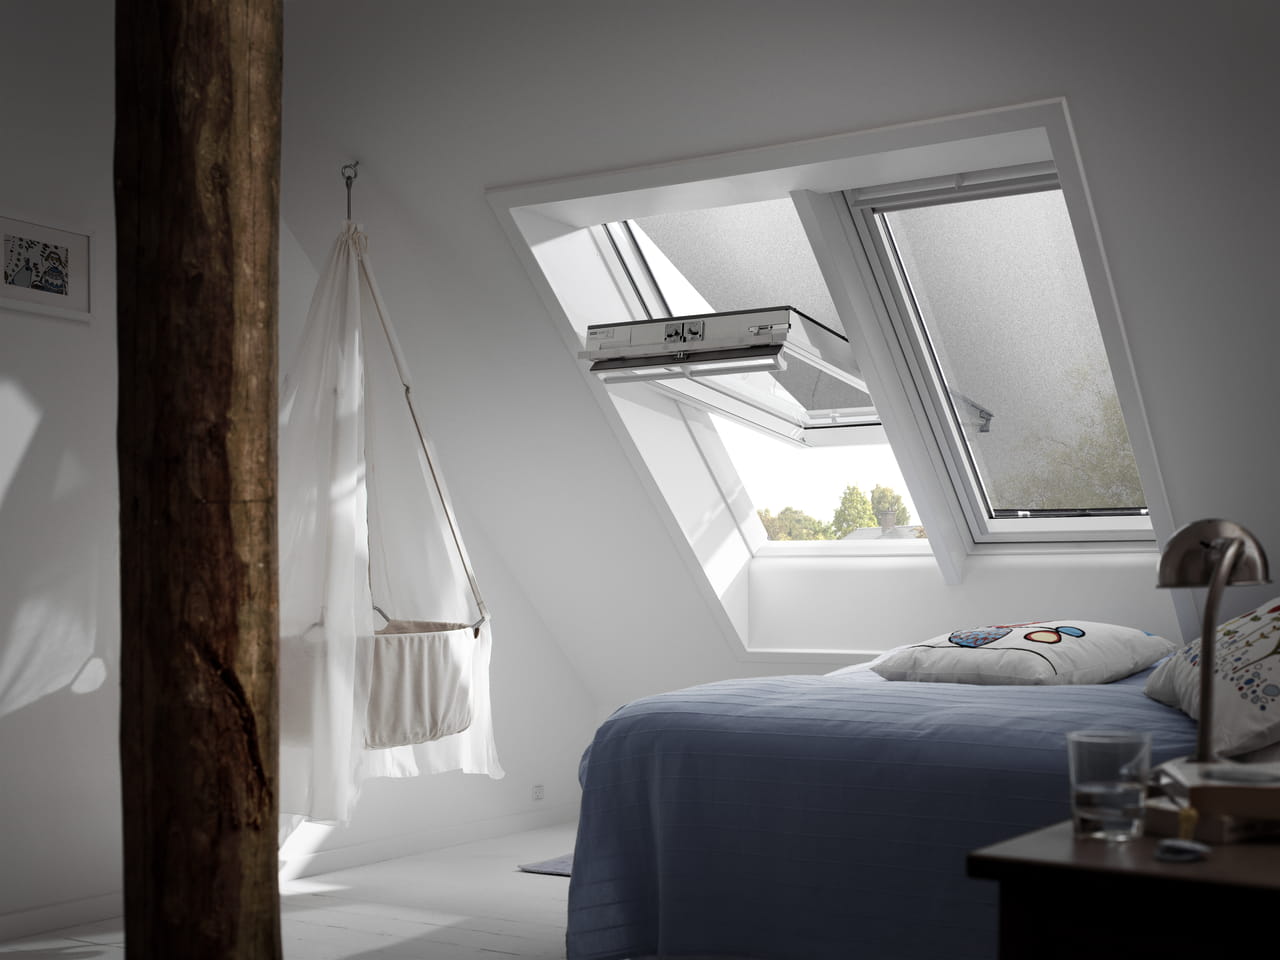 Bedroom image of 2 windows with VELUX anti-heat blinds installed